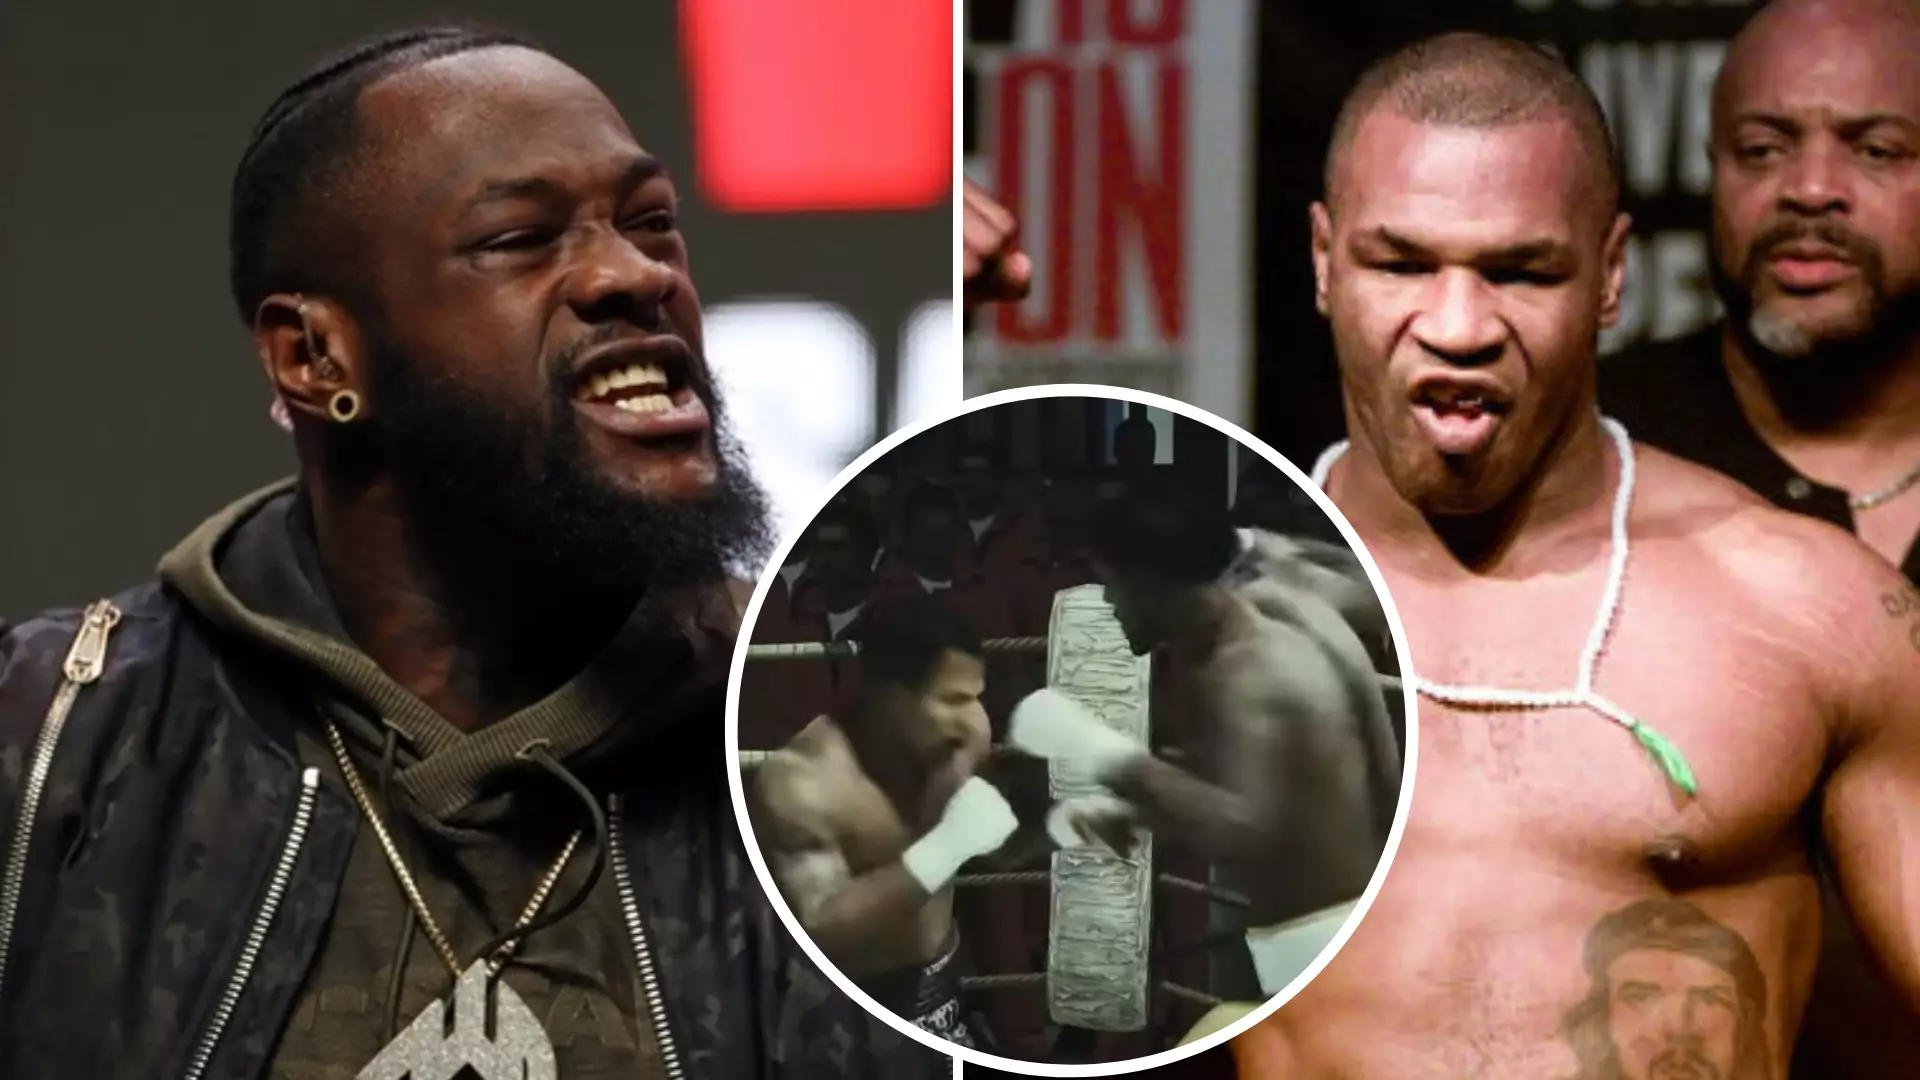 Bare-Knuckle Boxing Simulation Between Mike Tyson Vs Deontay Wilder Ends In A Brutal KO